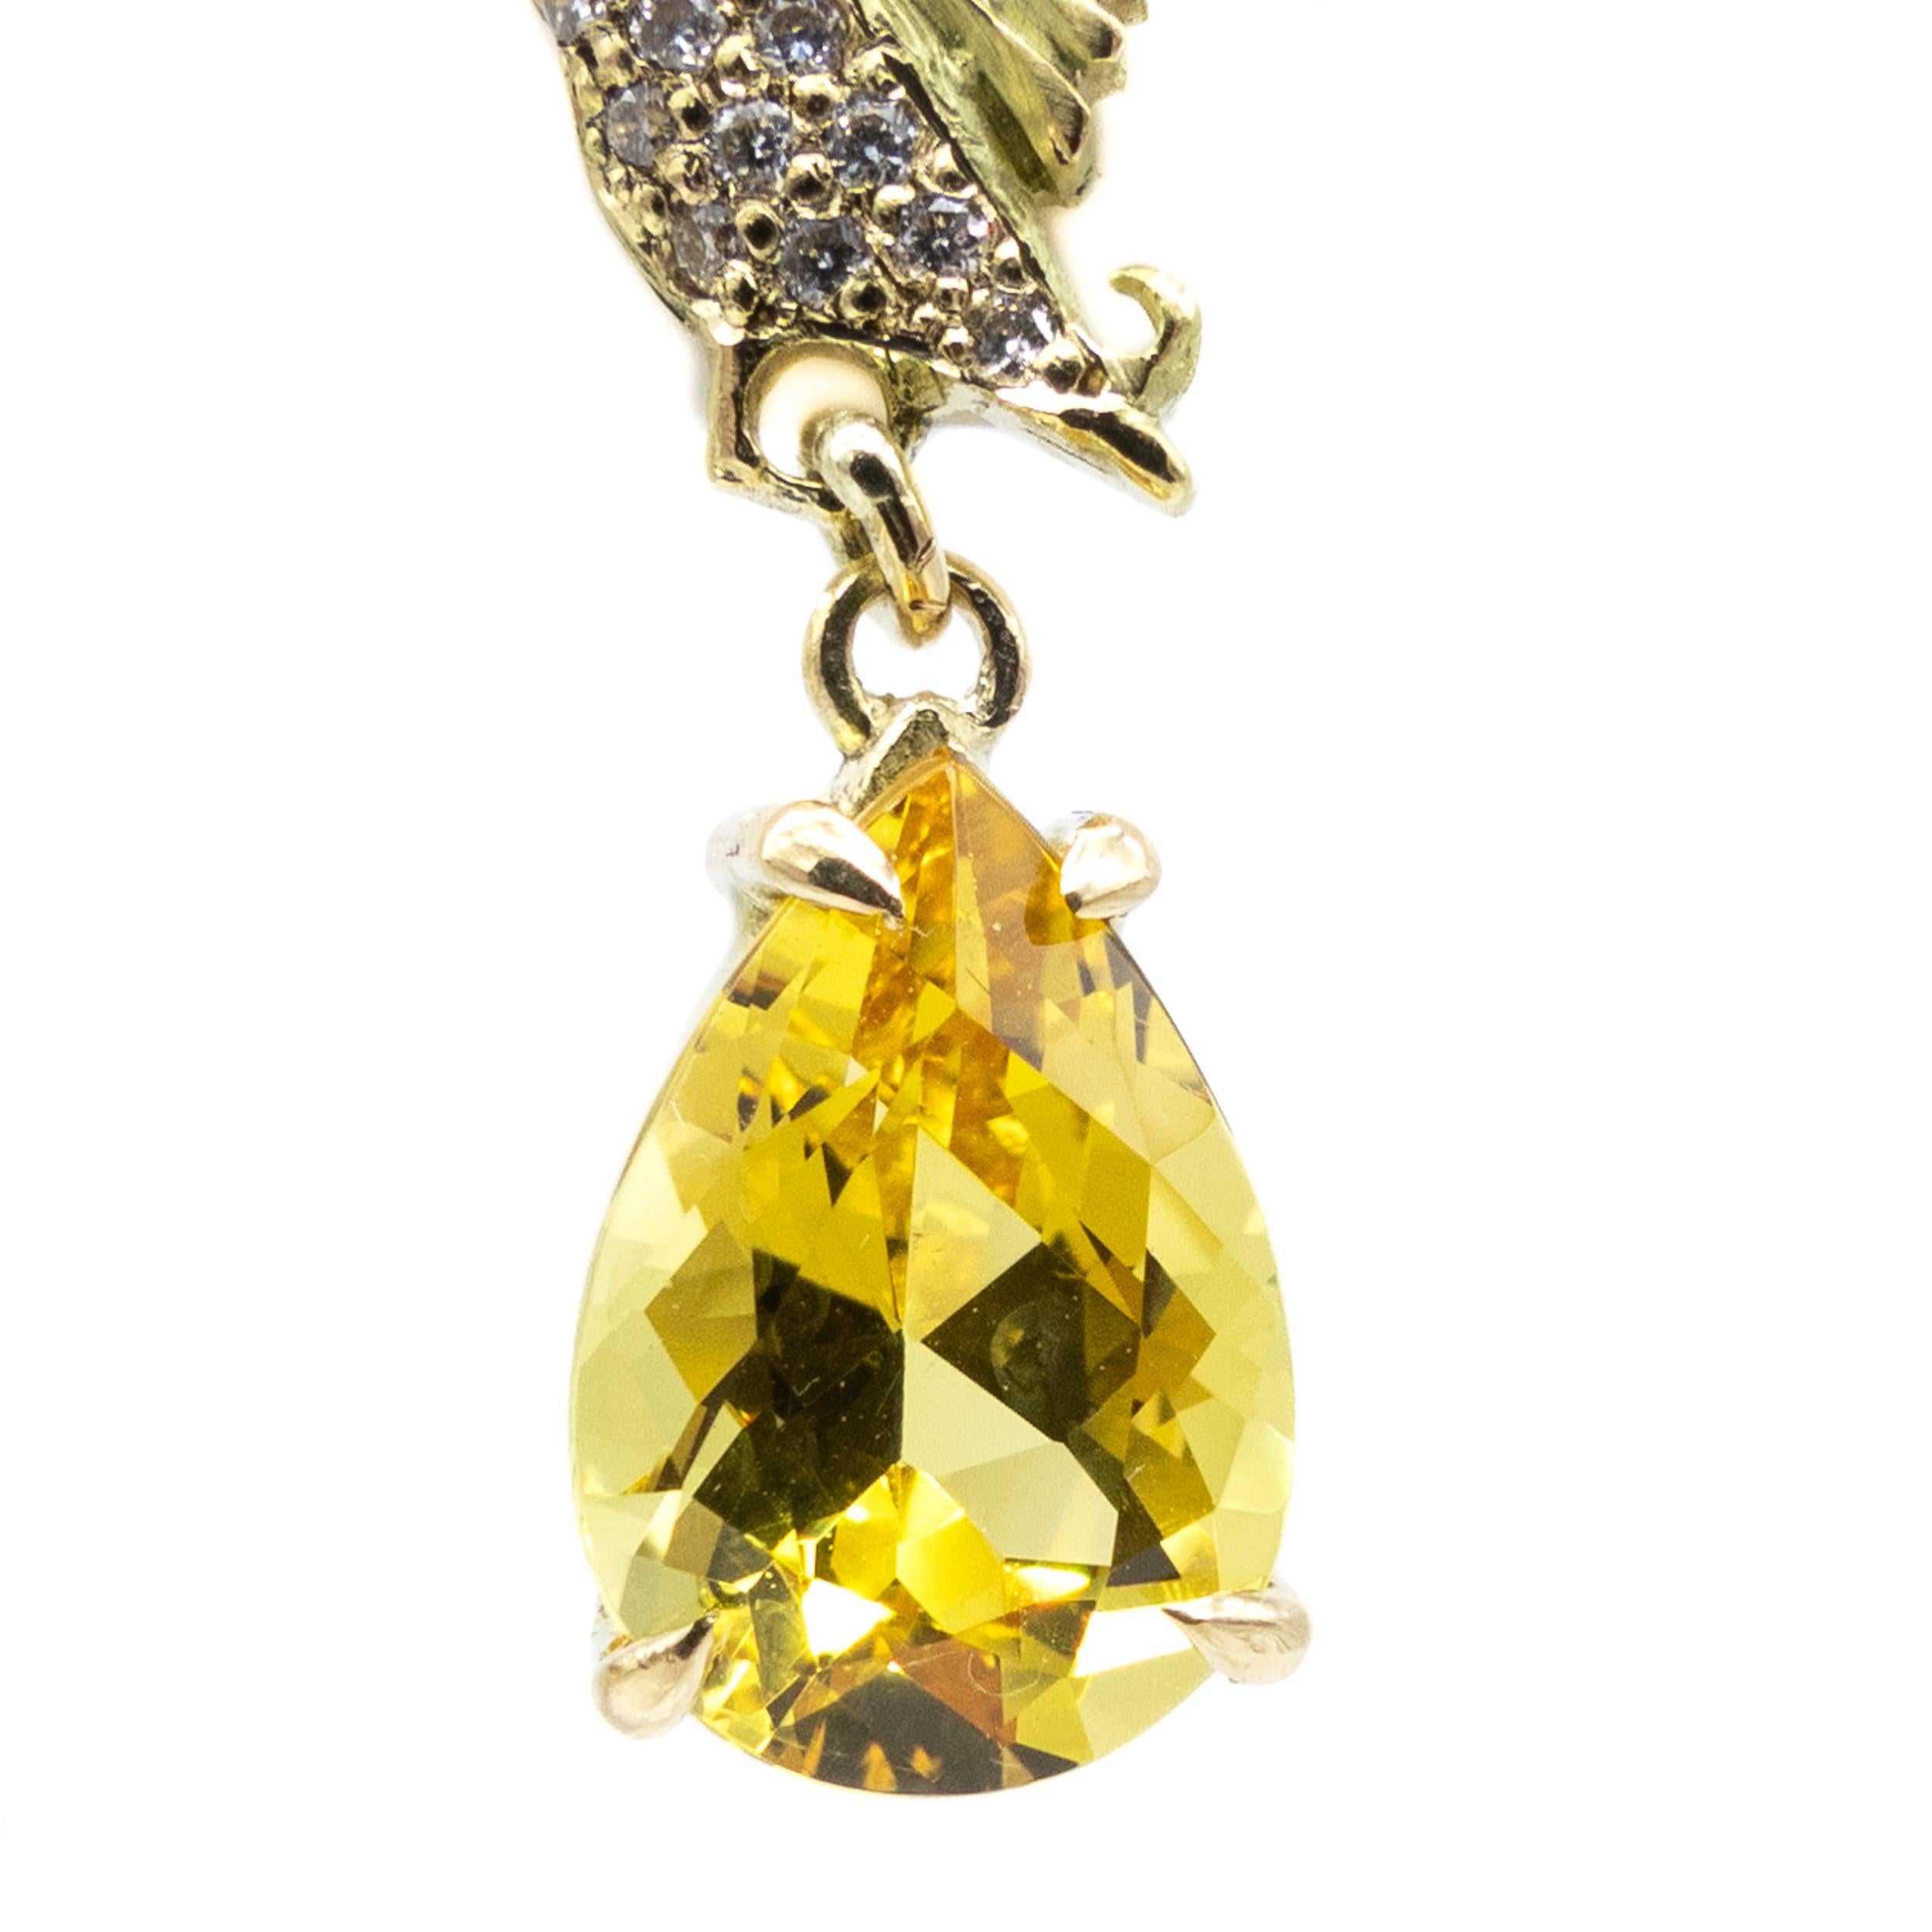 Earrings 18 Karat Gold Diamonds Pear Cut Yellow Beryl Vicente Gracia In New Condition For Sale In Valencia, ES